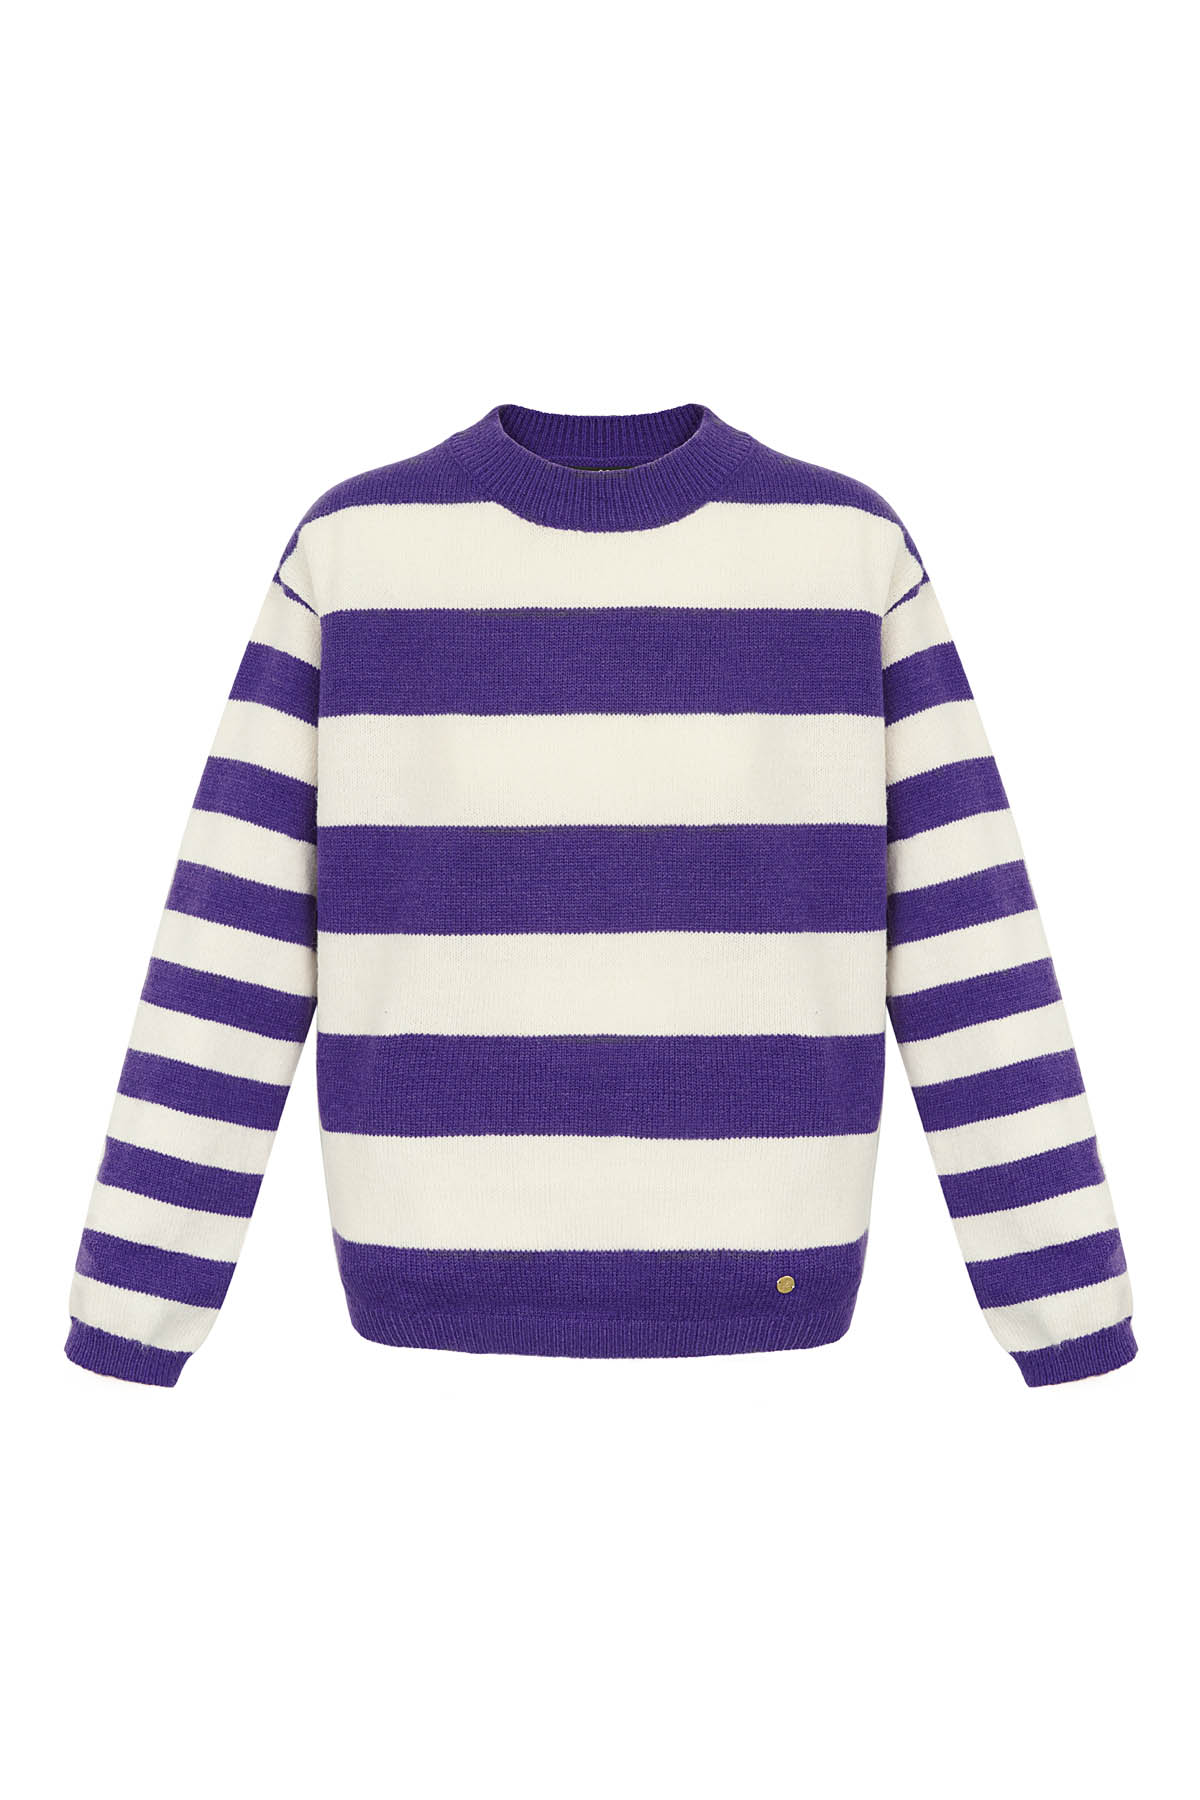 Knitted striped sweater - purple white